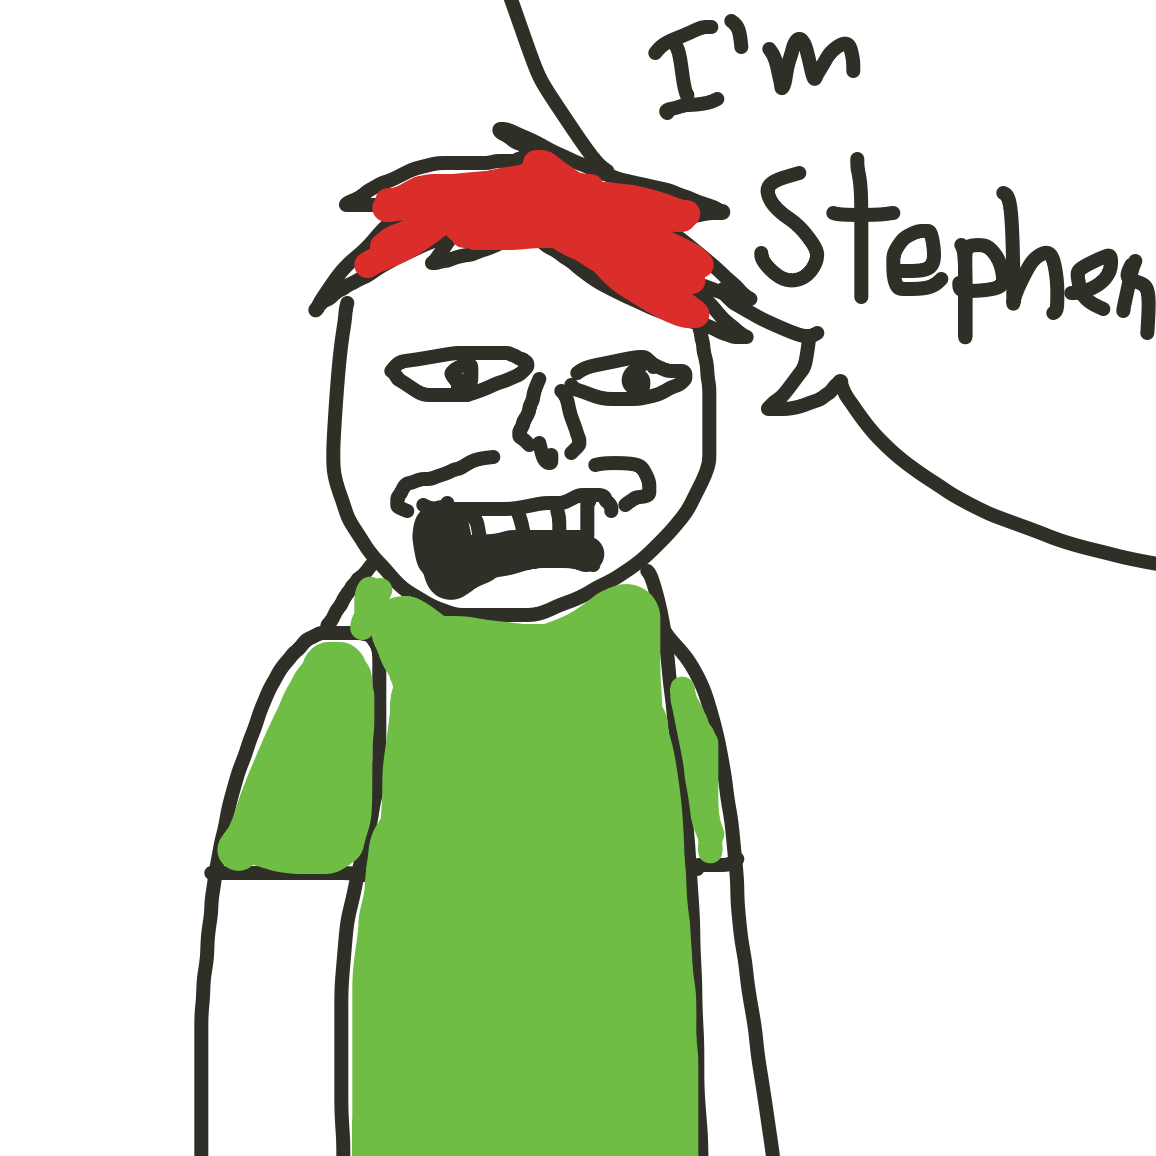 Oh look, it’s Stephen, famous for his hilarious running gag of being unbirthed. 
 - Online Drawing Game Comic Strip Panel by Uugh